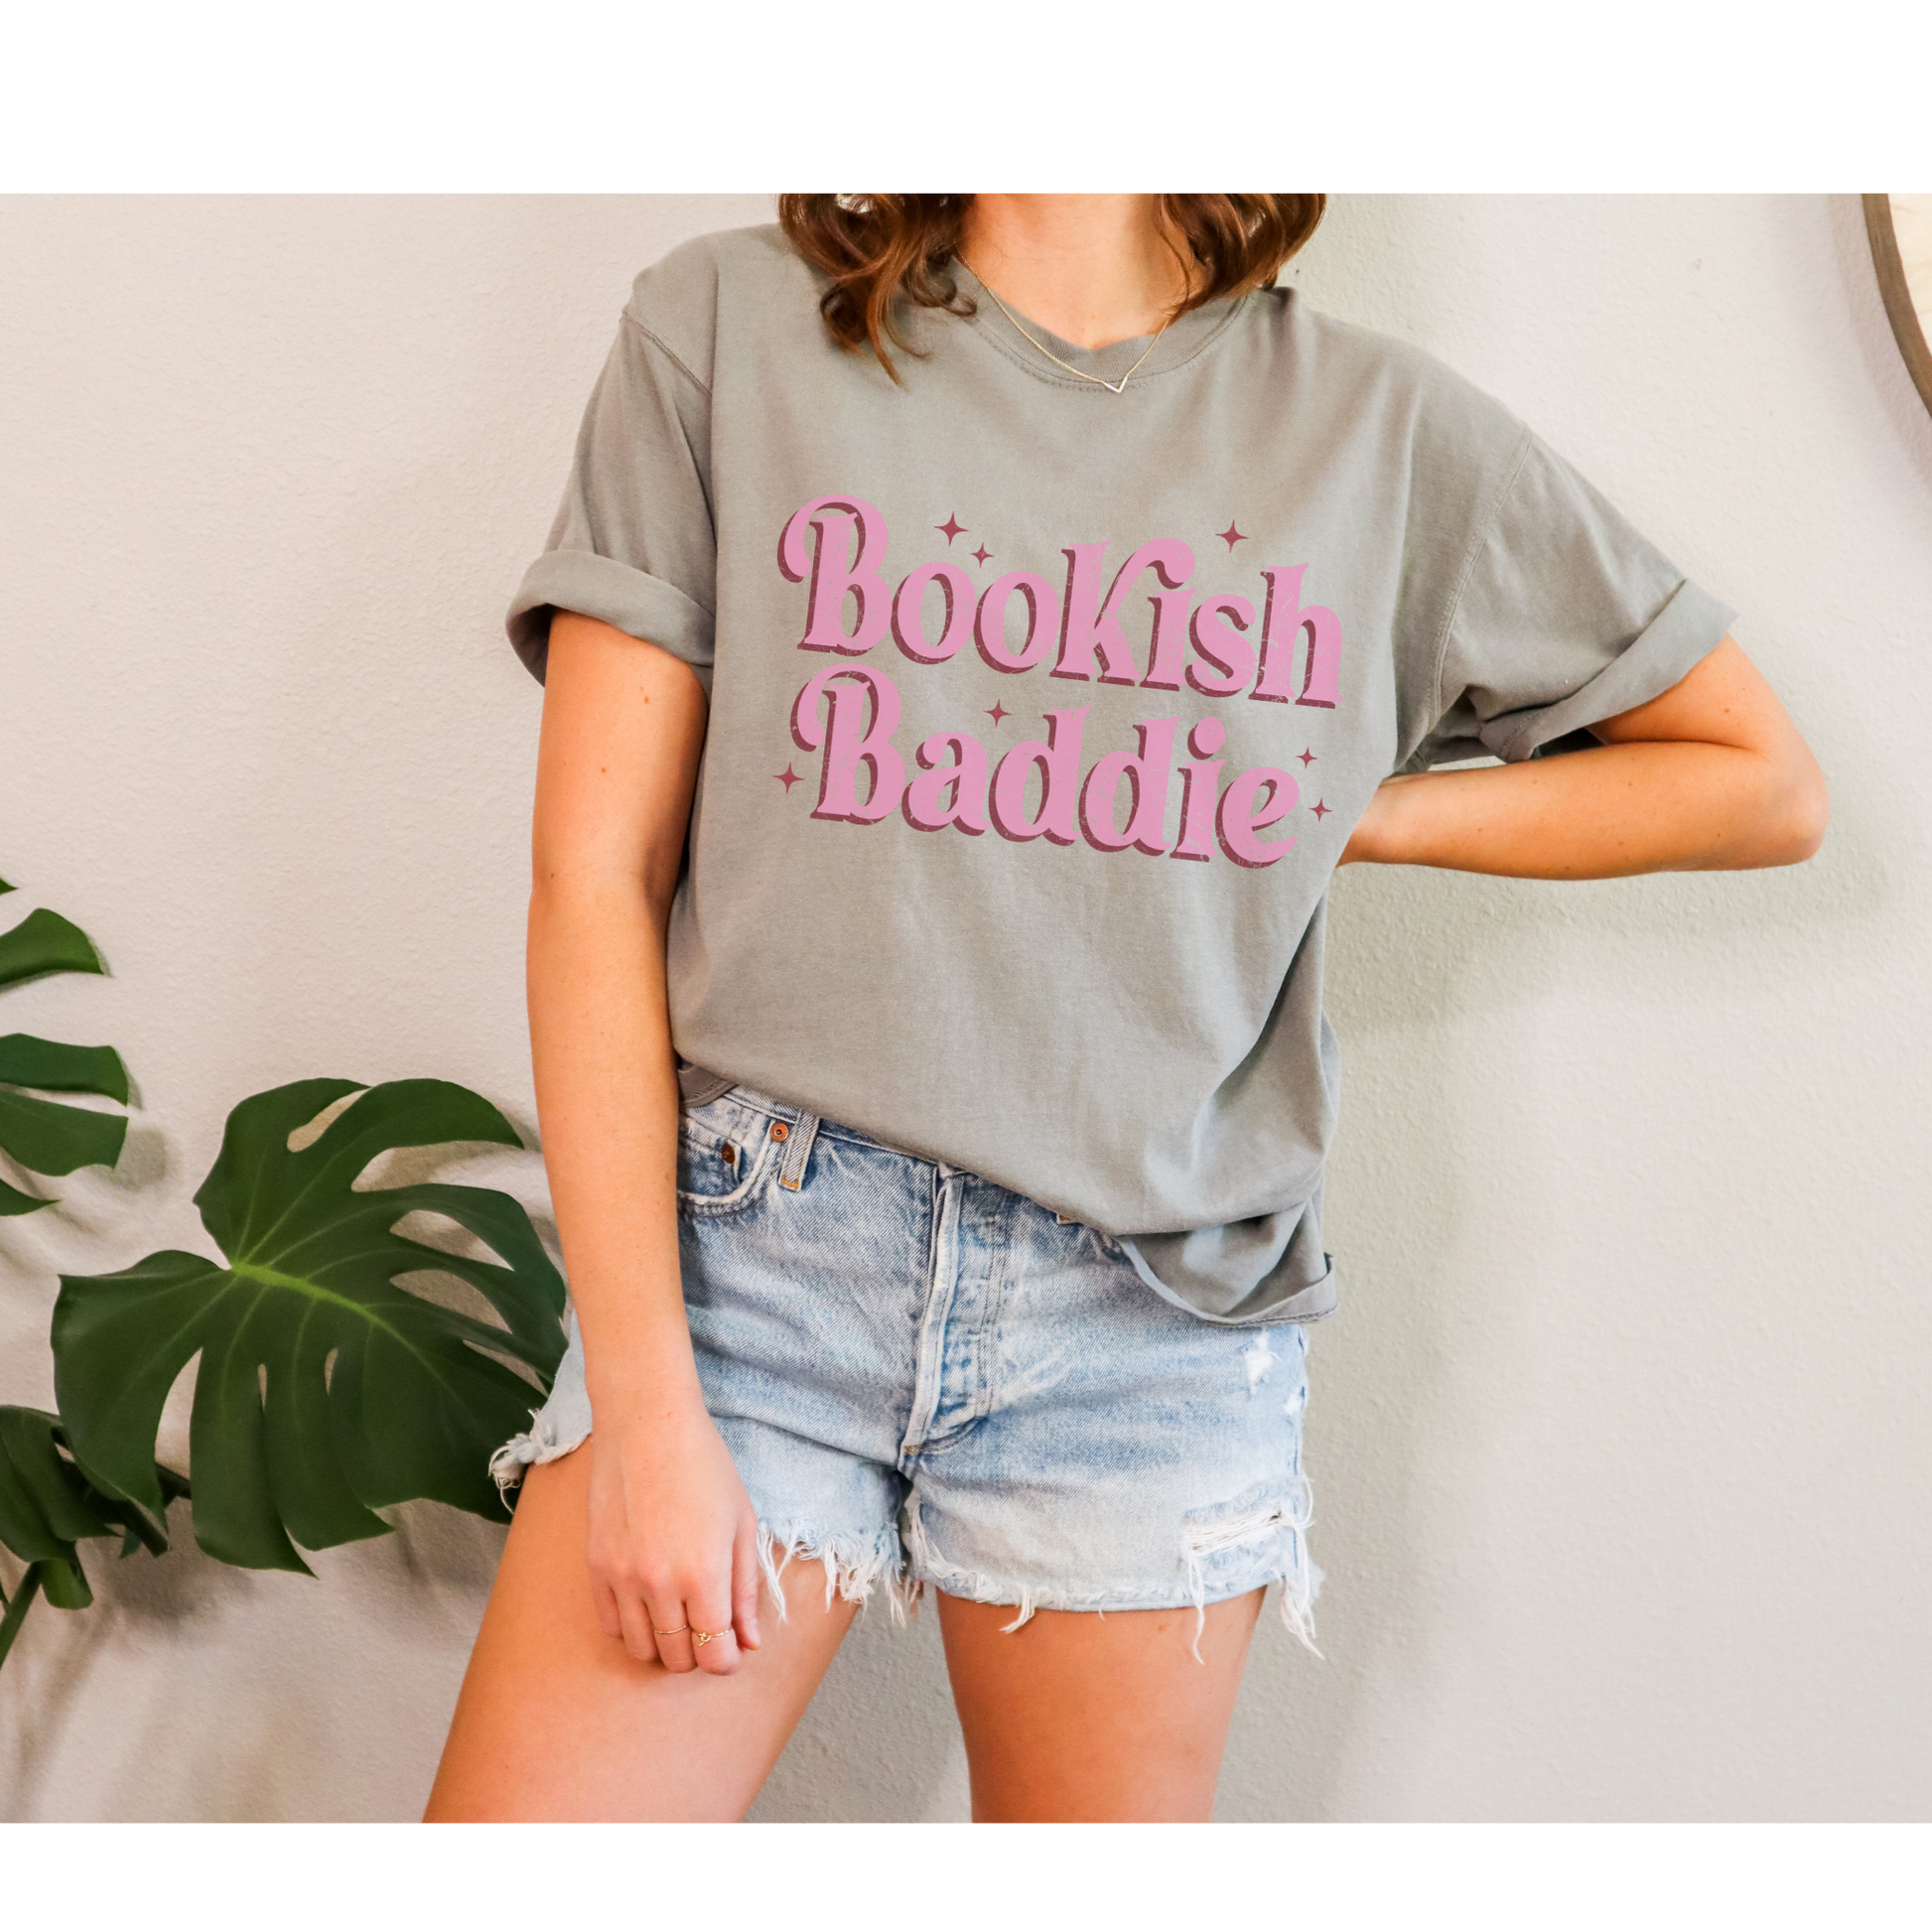 Elevate your bookish style with our "Bookish Baddie" Graphic Tee. This eye-catching piece combines a pop of pink with an empowering message, creating a fun and uniquely fashionable look that's perfect for all the confident book lovers out there.